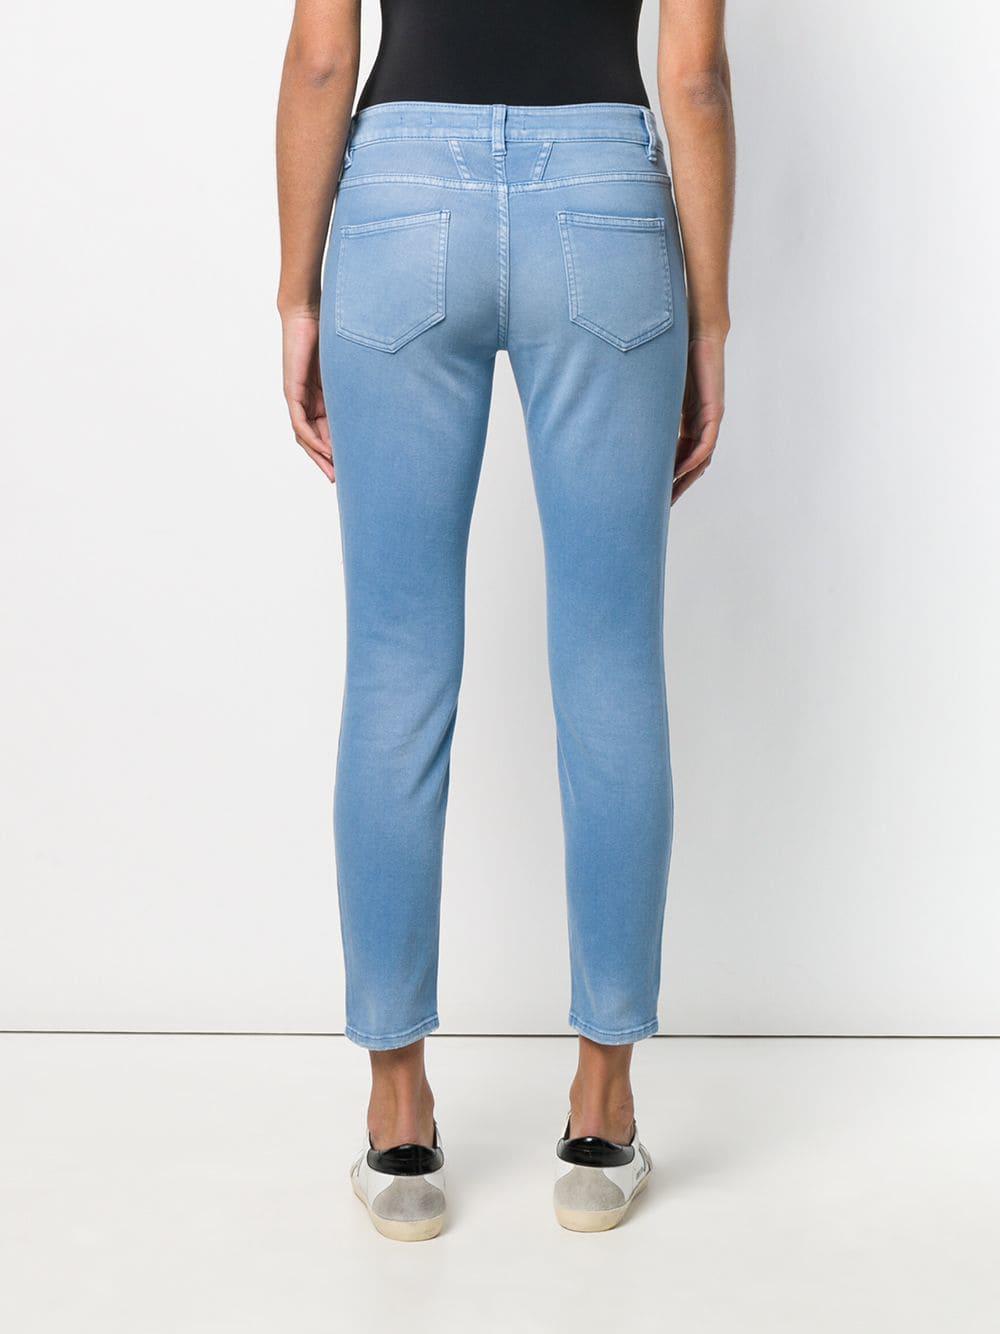 Lyst - Closed Classic Skinny Jeans in Blue